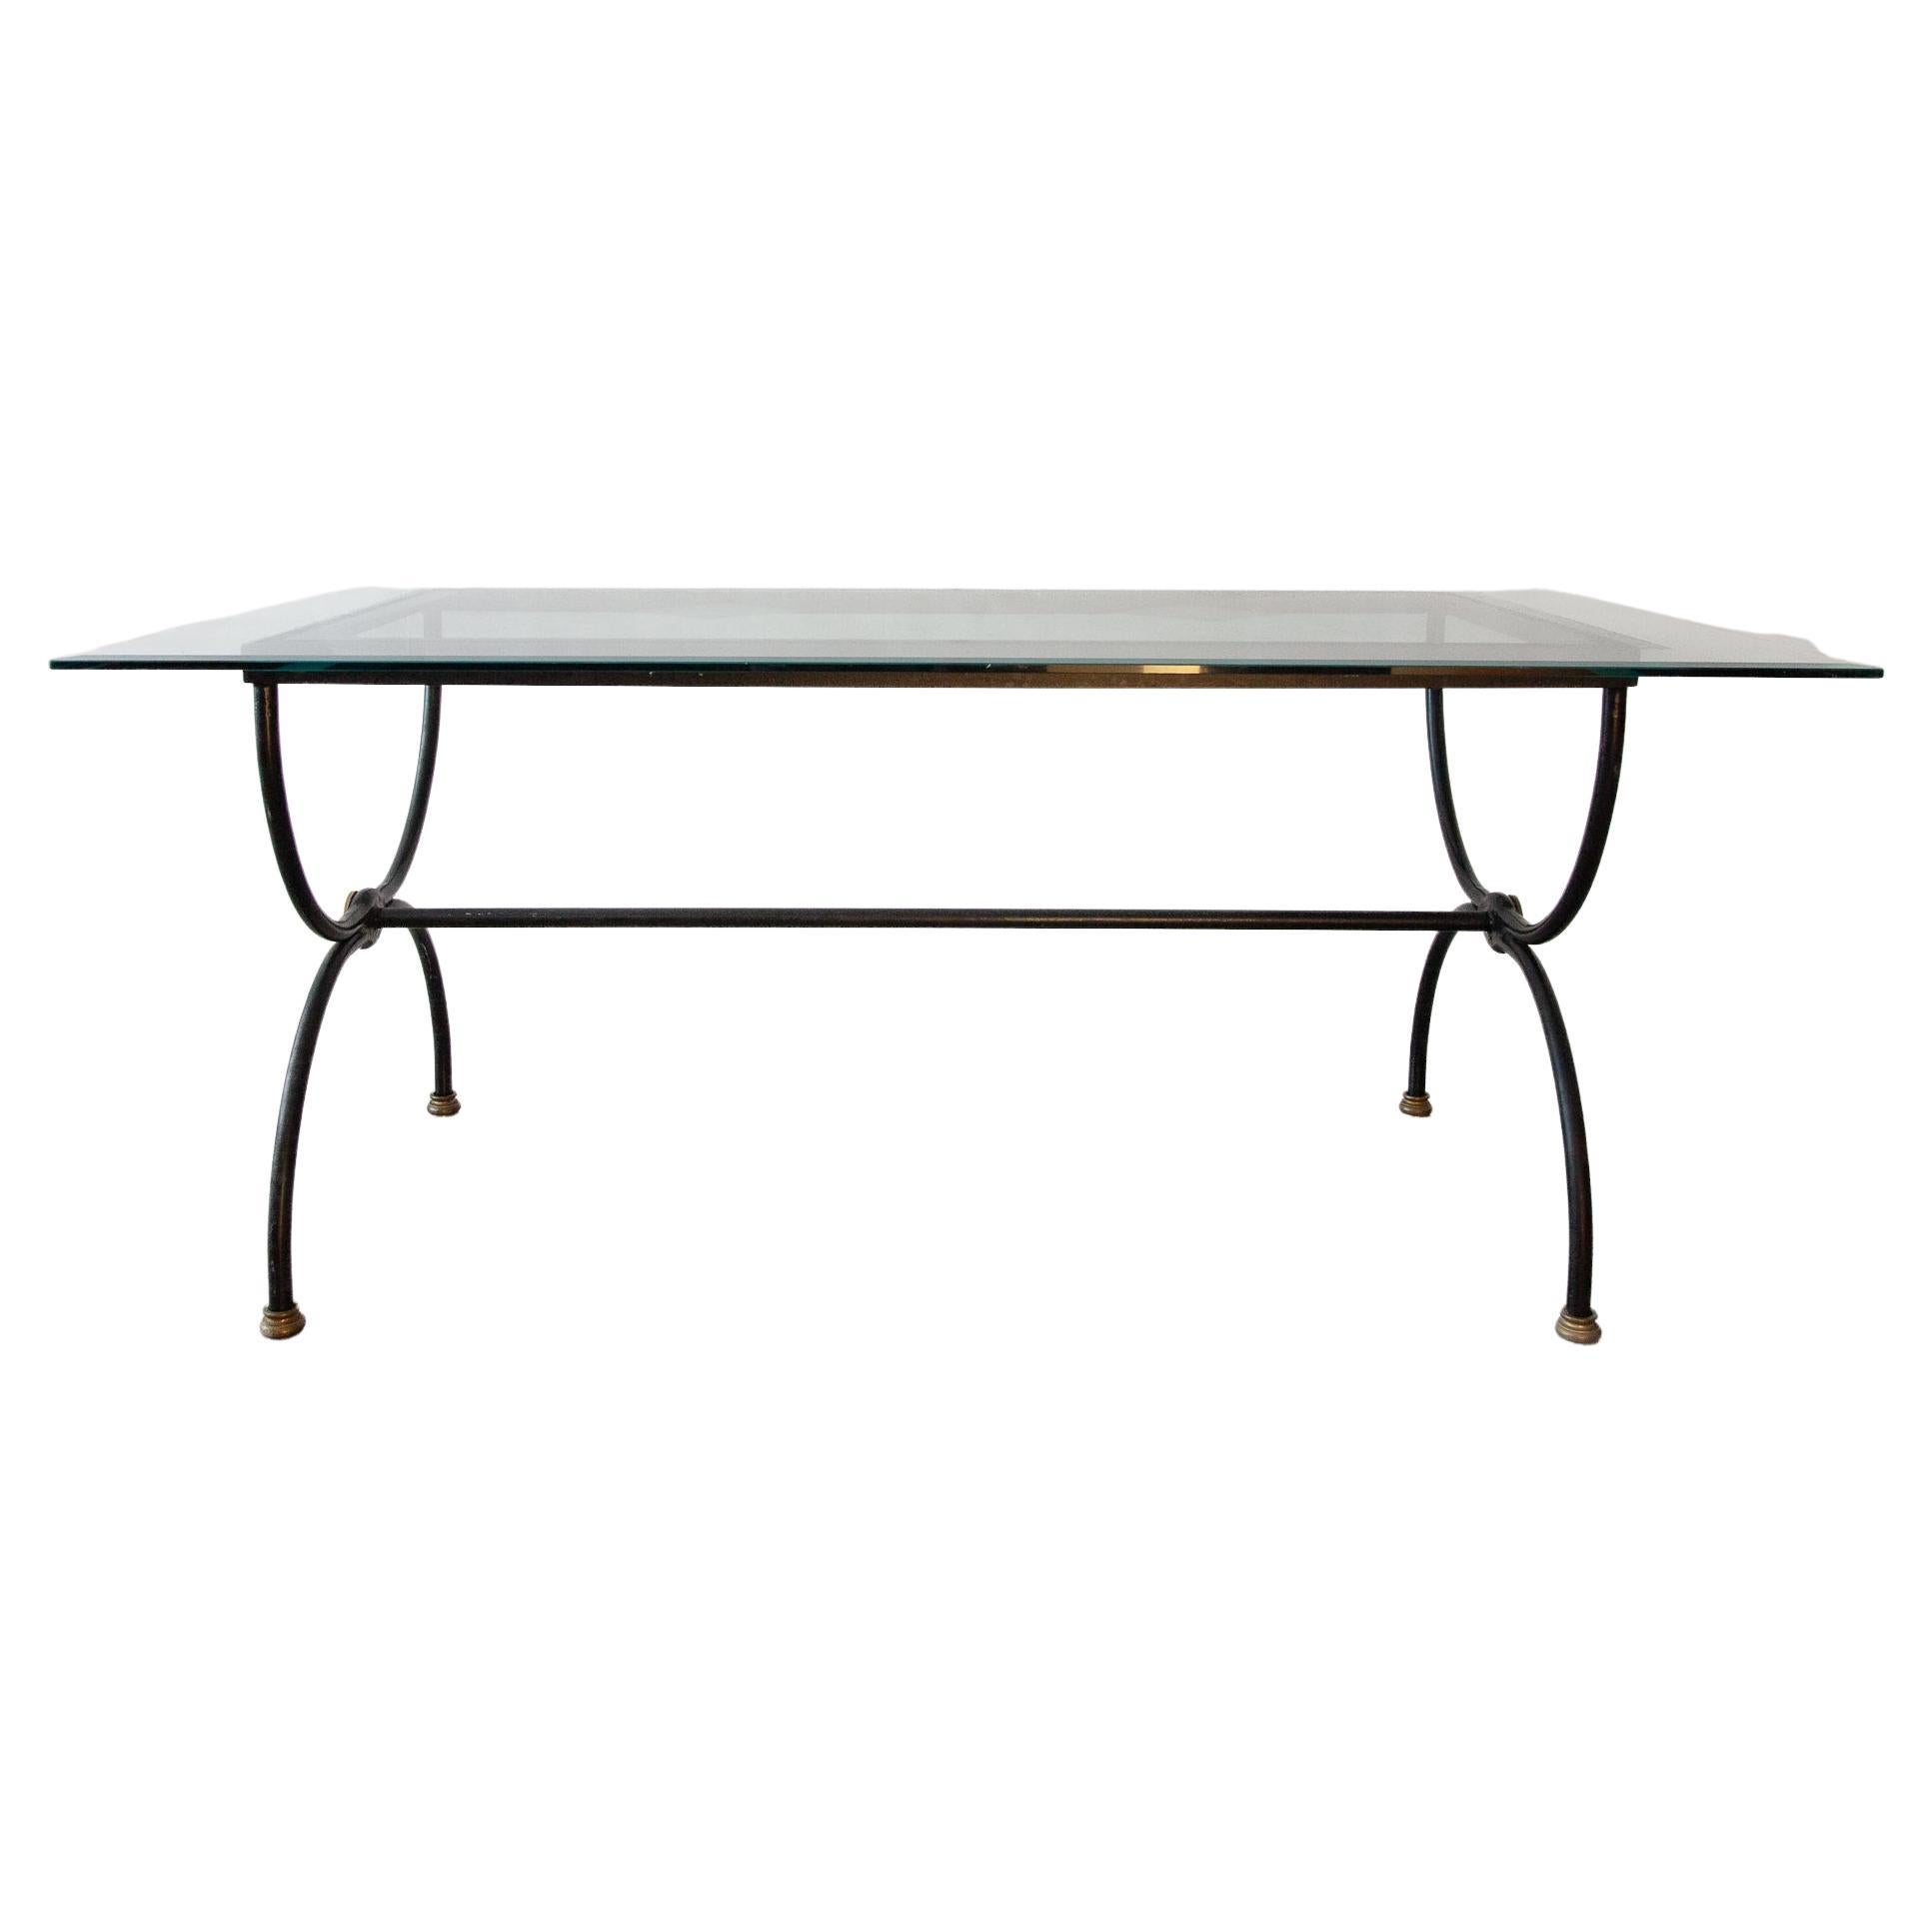 Wrought iron table with clear glass faceted top, Italy 1970s, A great elegance and very rare, the glass presented in excellent condition also suitable as an important desk or console table. Vintage Frederick Weinberg Design also available chairs